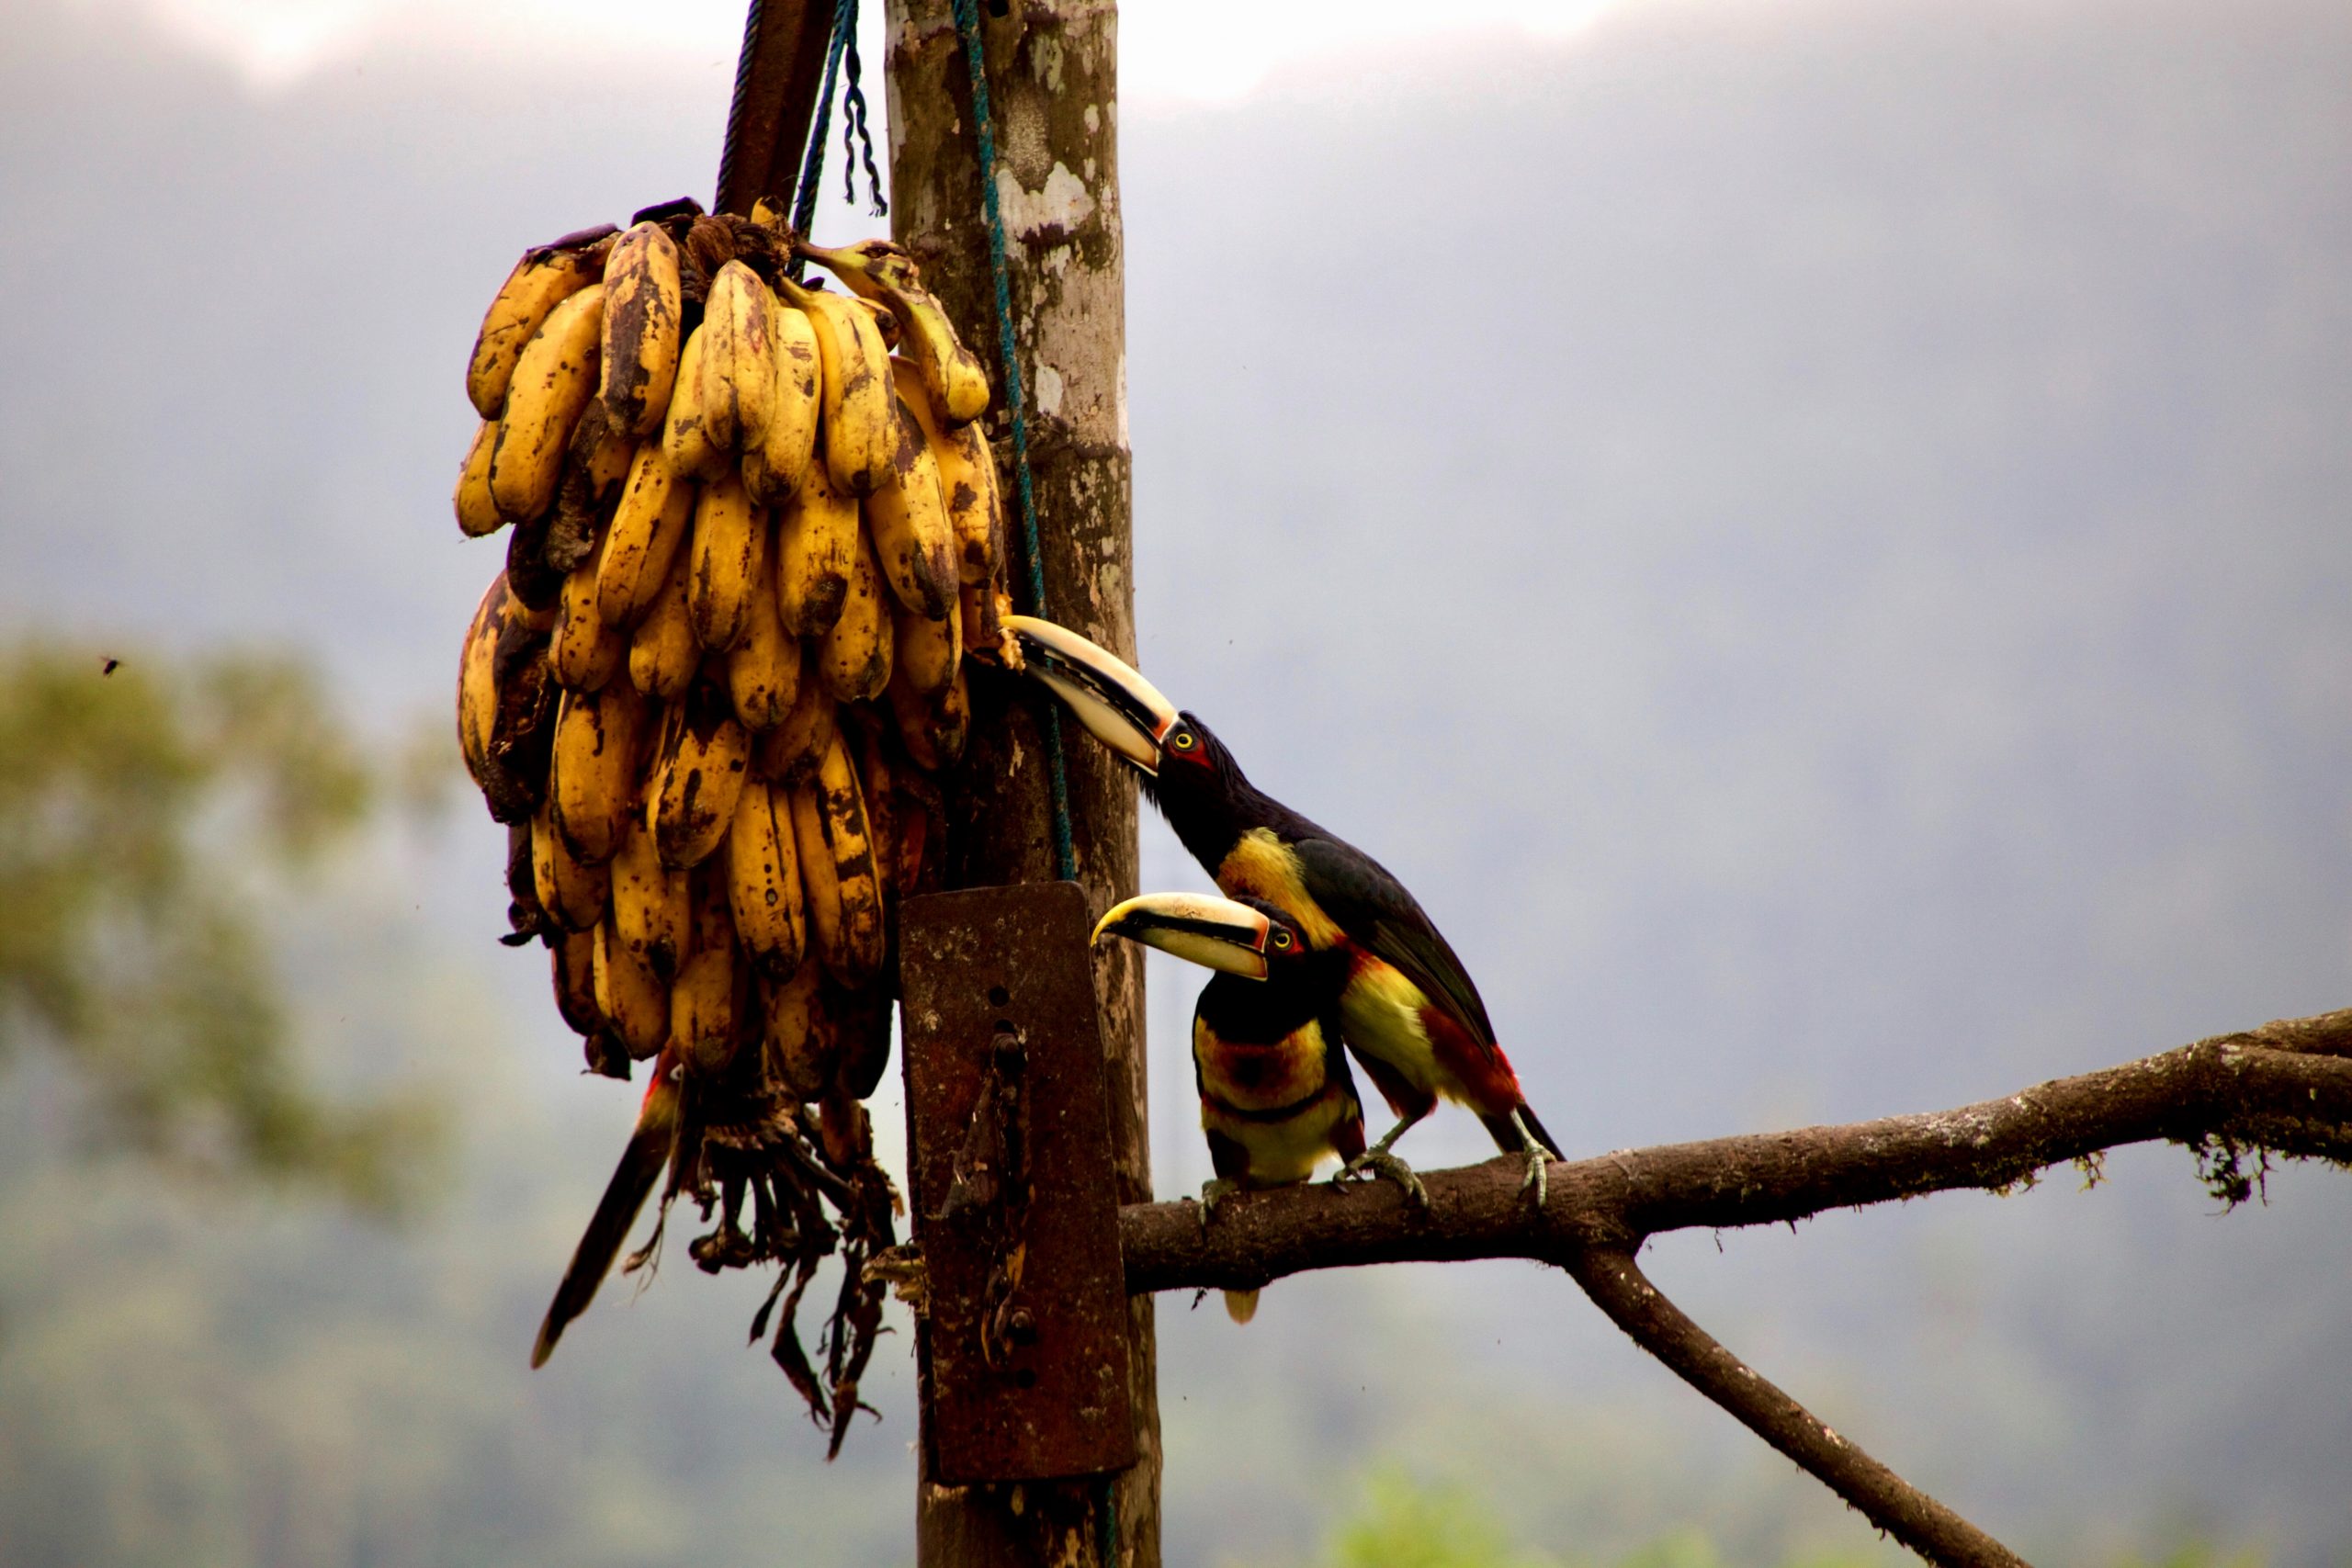 2 birds with long beaks, pecking at a huge bundle of yellowish brown bananas hanging off a tree